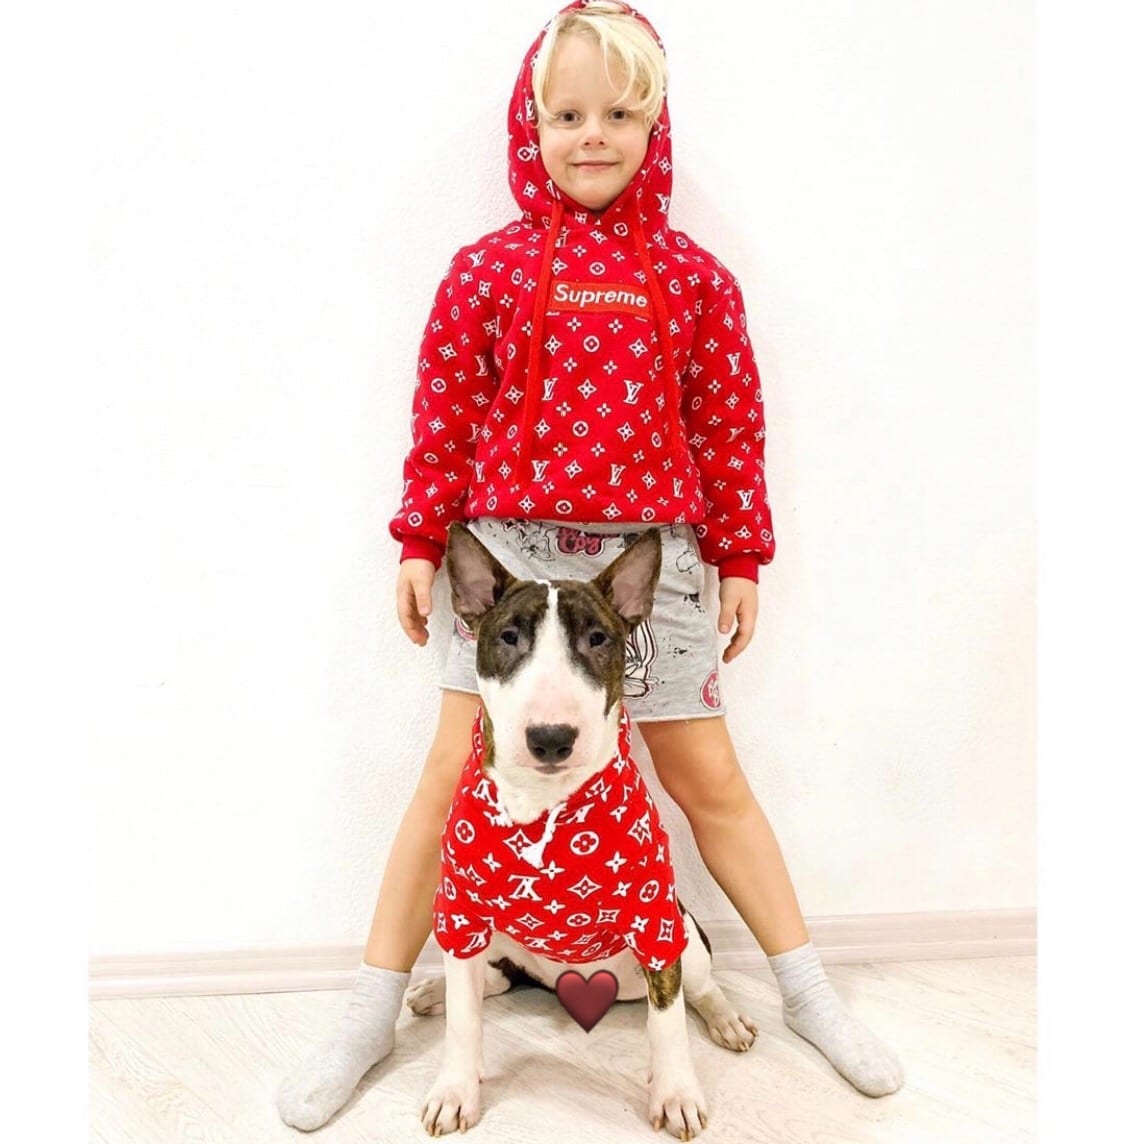 A Bull Terrier sitting on the floor in between the legs of a boy standing behind him